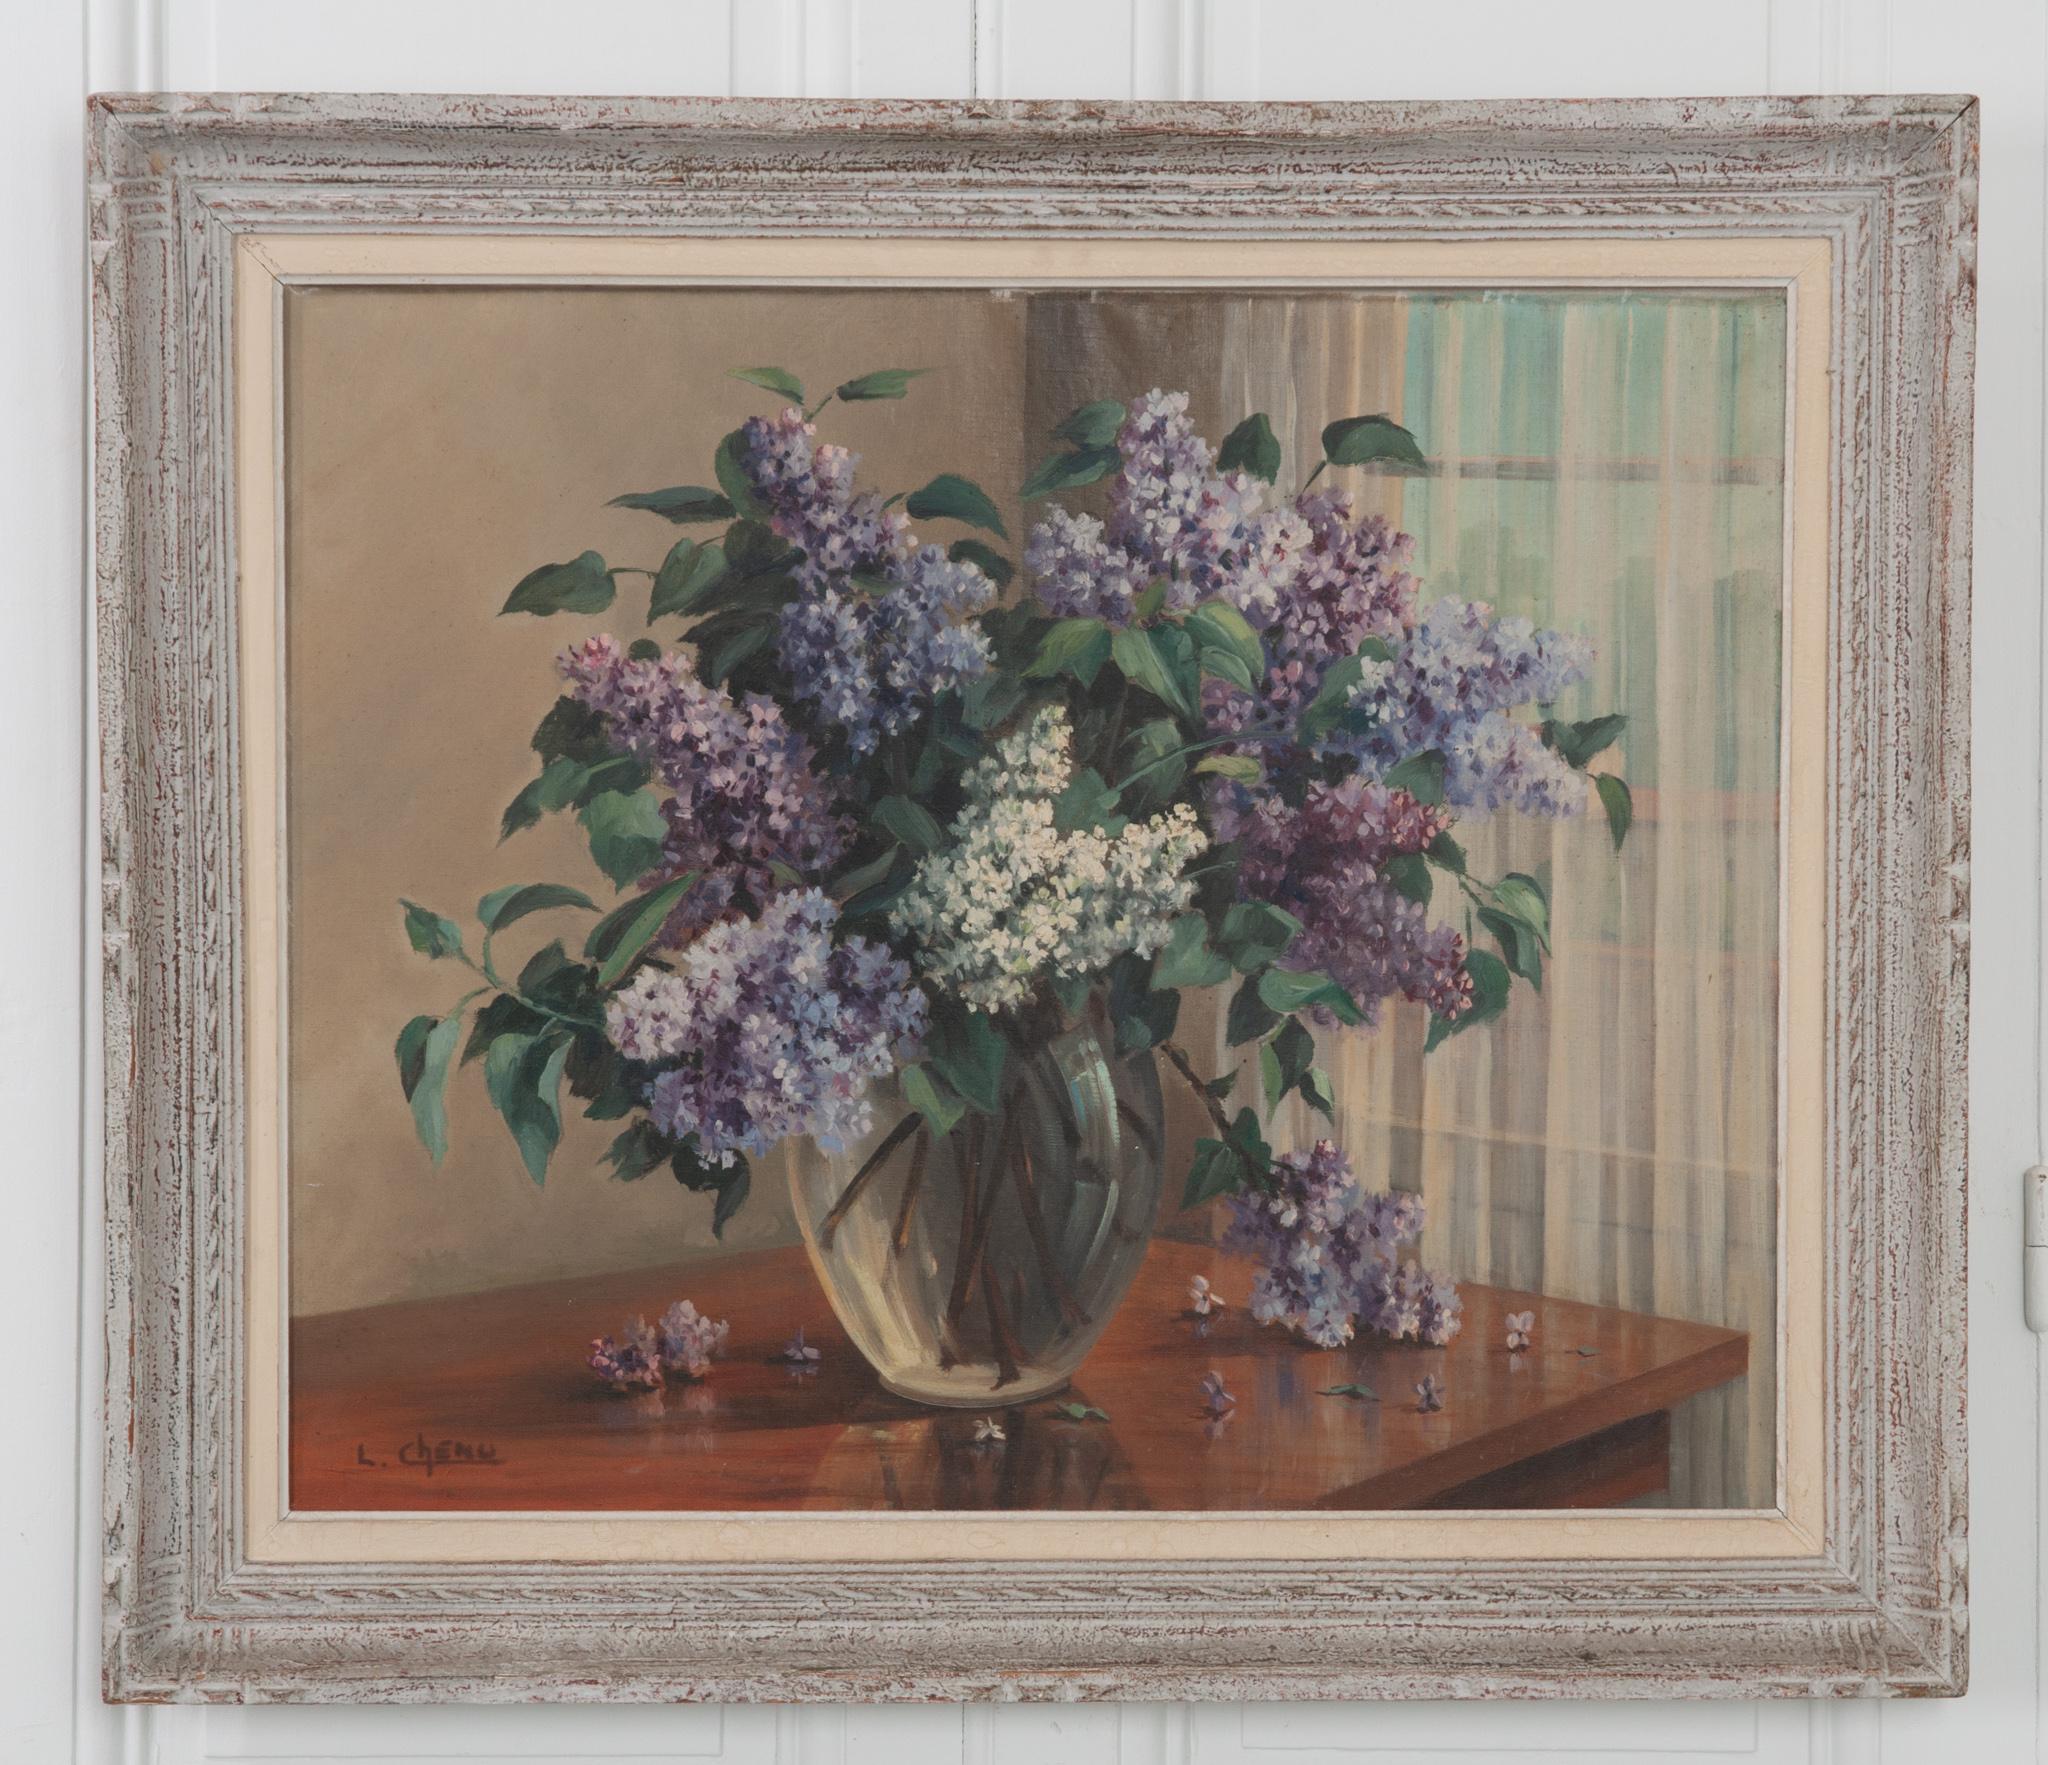 This framed oil on canvas was painted by French artist Lucien Chenu. An overflowing vase of beautiful lilacs sits near a bright window, painted in a way that conveys the loveliness in everyday objects. The frame has layers of character that matched